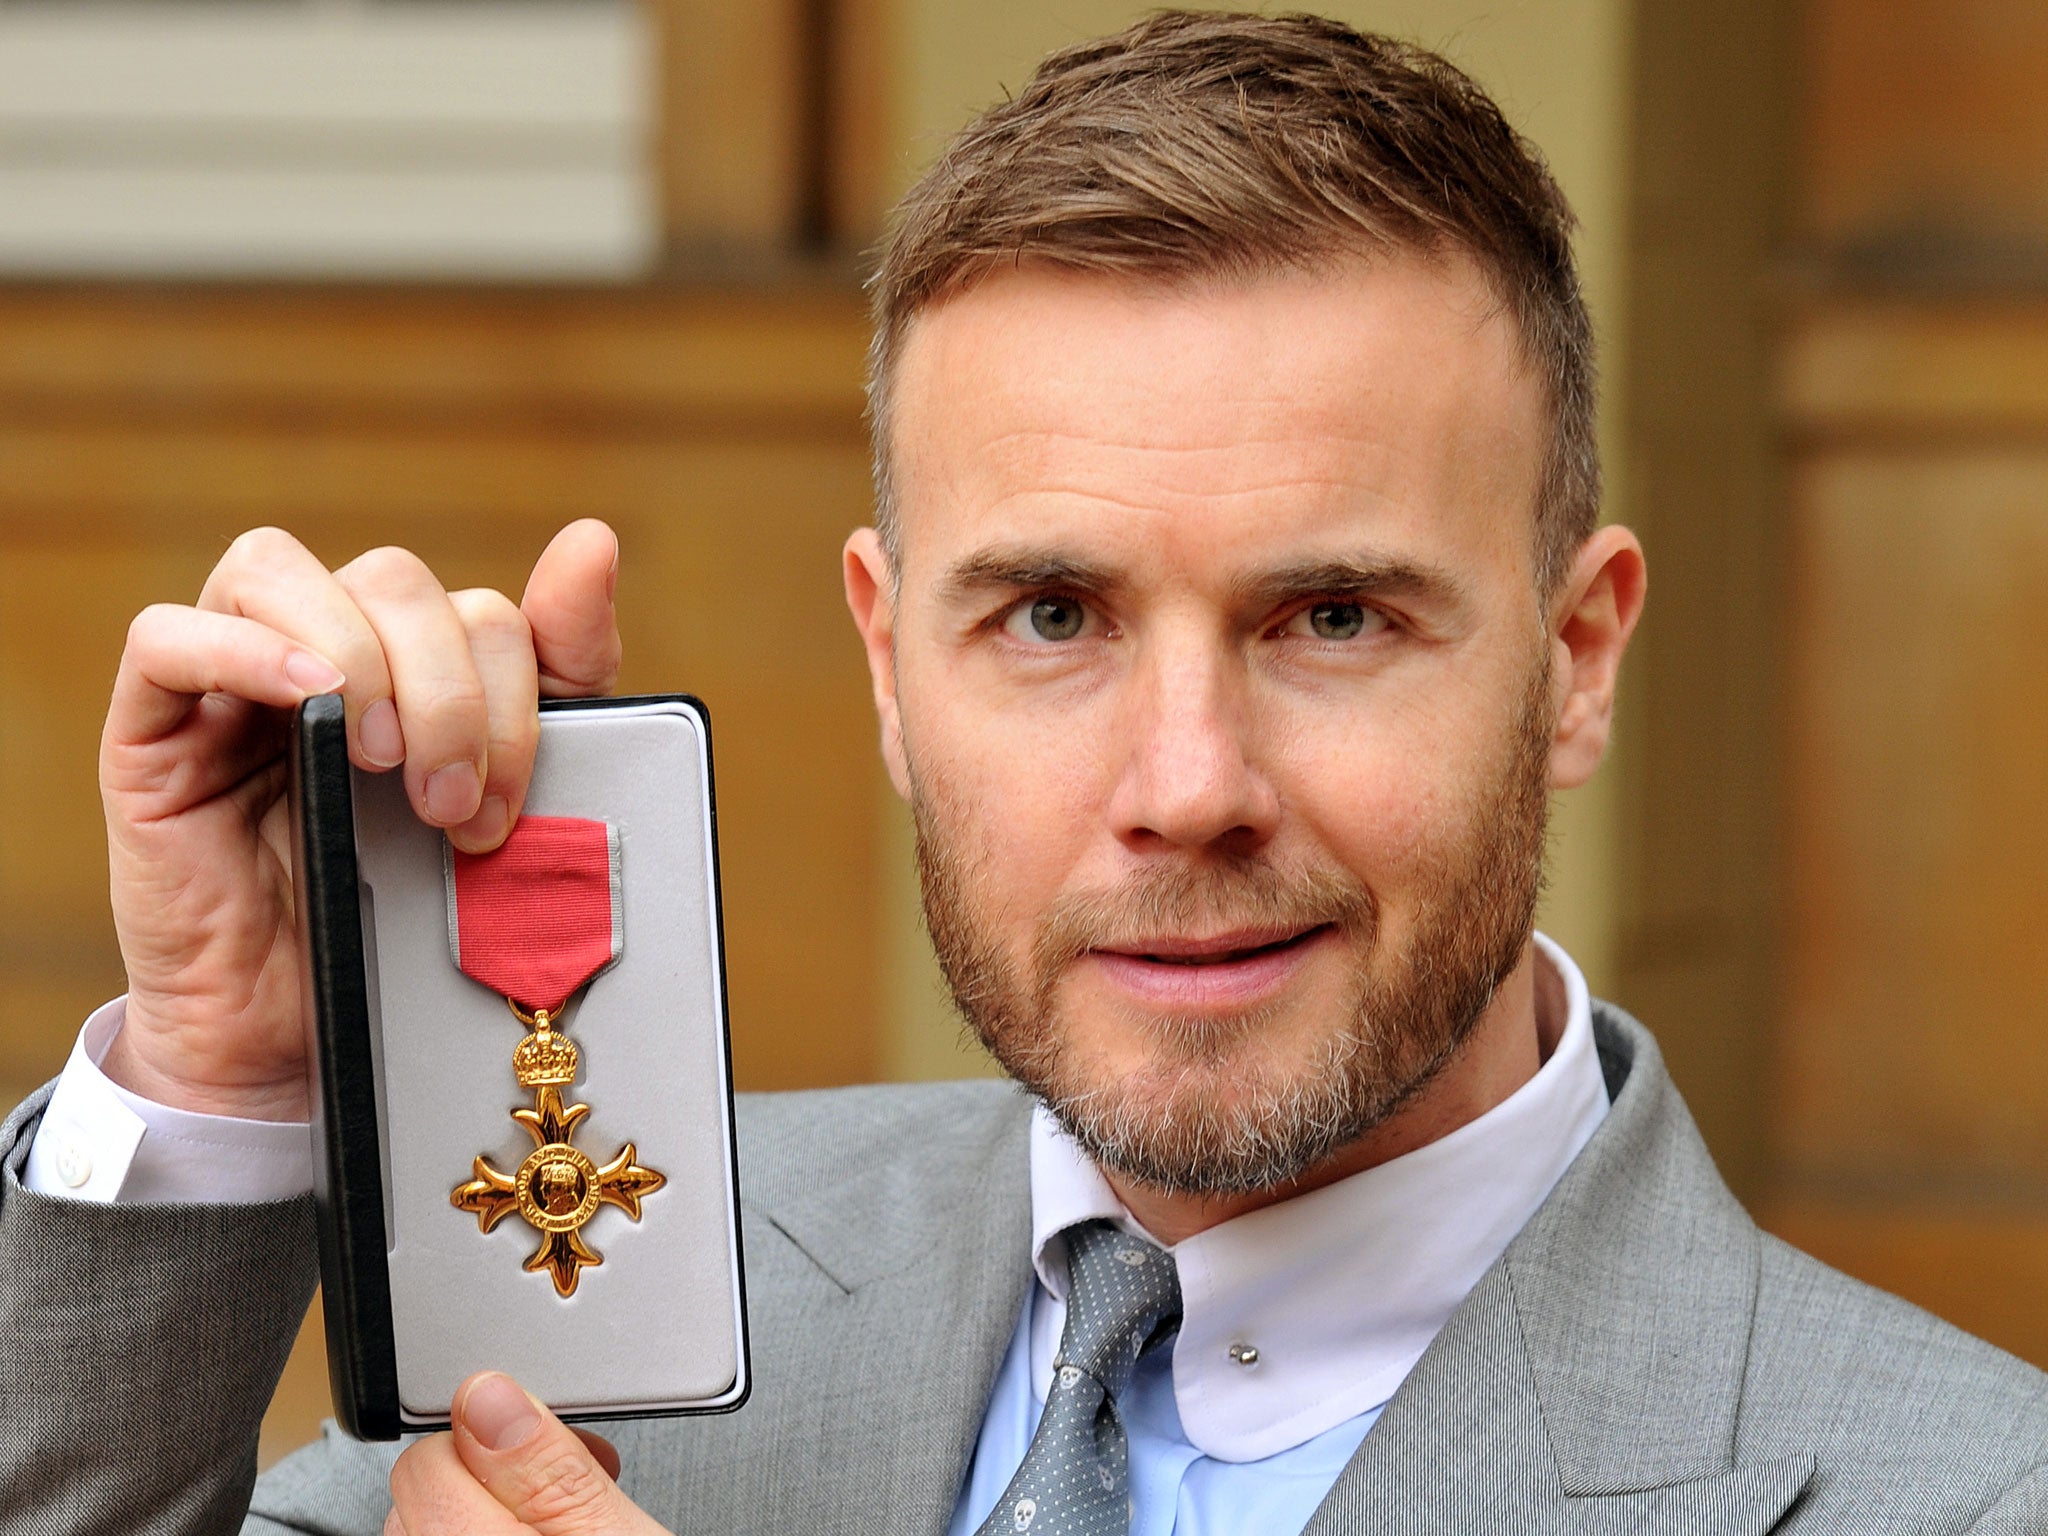 Gary Barlow holding his OBE, as the Take That star faced calls to hand back his OBE over claims he invested in a tax avoidance scheme. PRESS ASSOCIATION Photo. Issue date: Monday May 12, 2014. Prime Minister David Cameron hit out at "aggressive" tax avoid